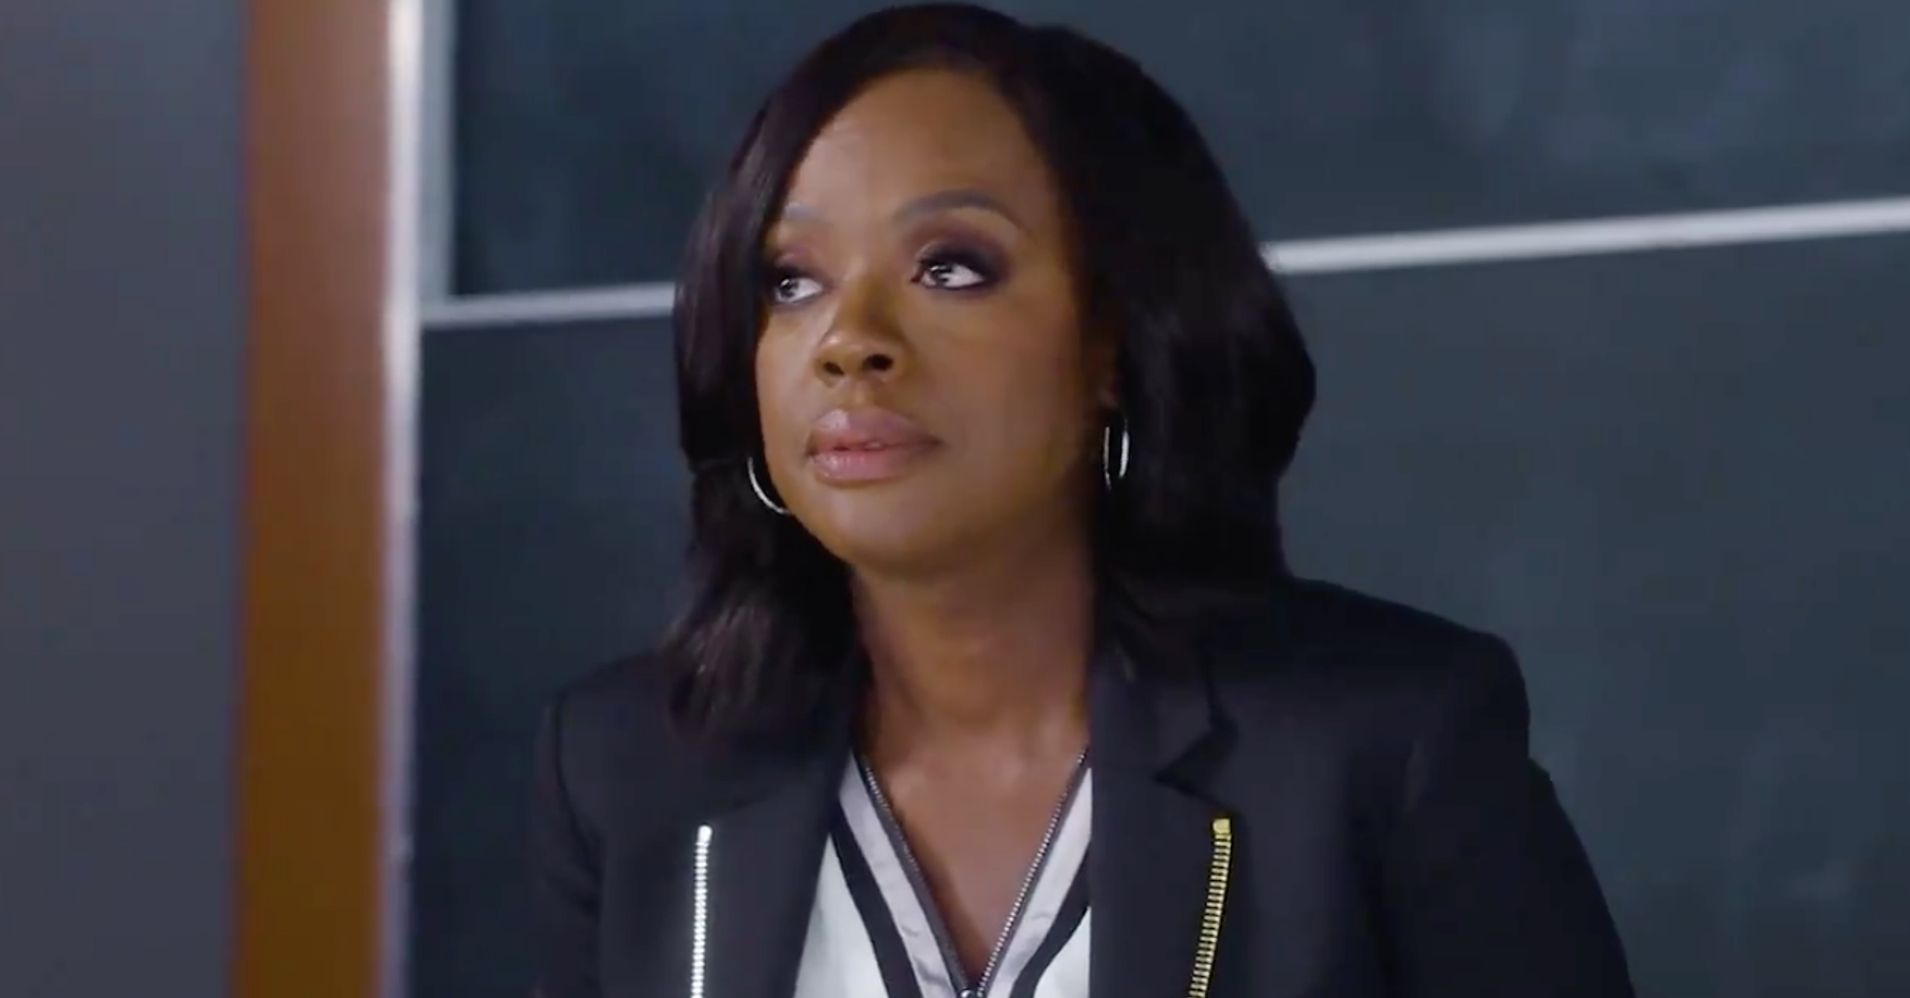 How To Get Away With A Murderer Streaming 'How To Get Away With Murder' Trailer Promises A Drama-Filled New